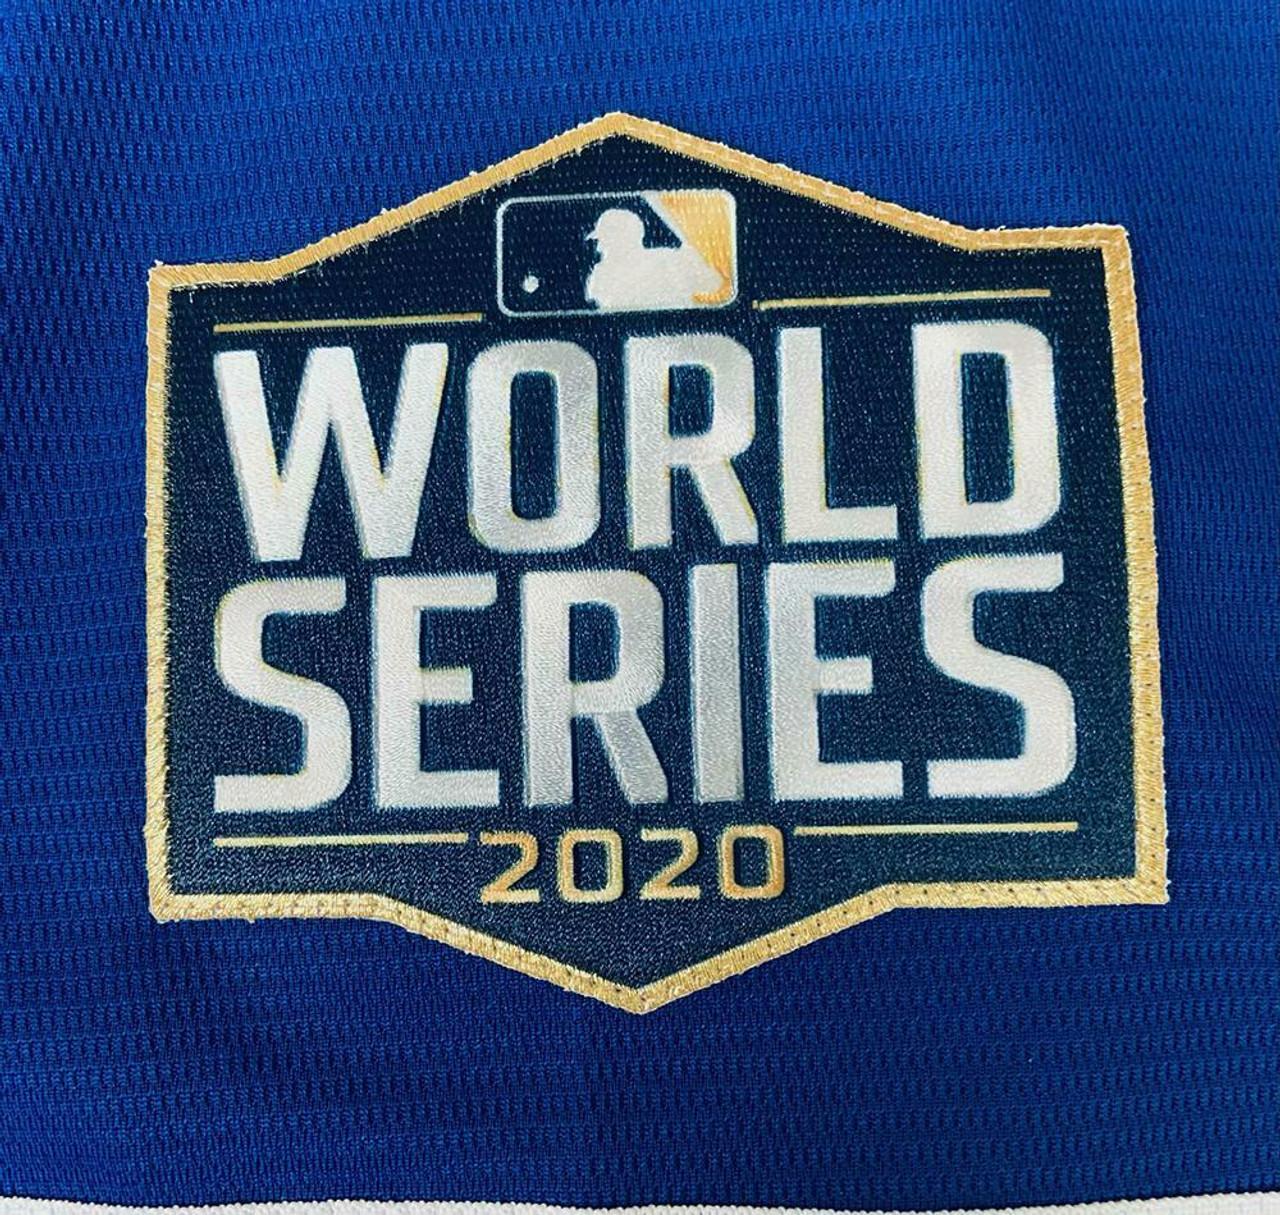 Corey Seager Signed Los Angeles Dodgers 2020 World Series Champion Patch  Jersey Inscribed 2020 WS MVP (Fanatics Hologram & MLB Hologram)